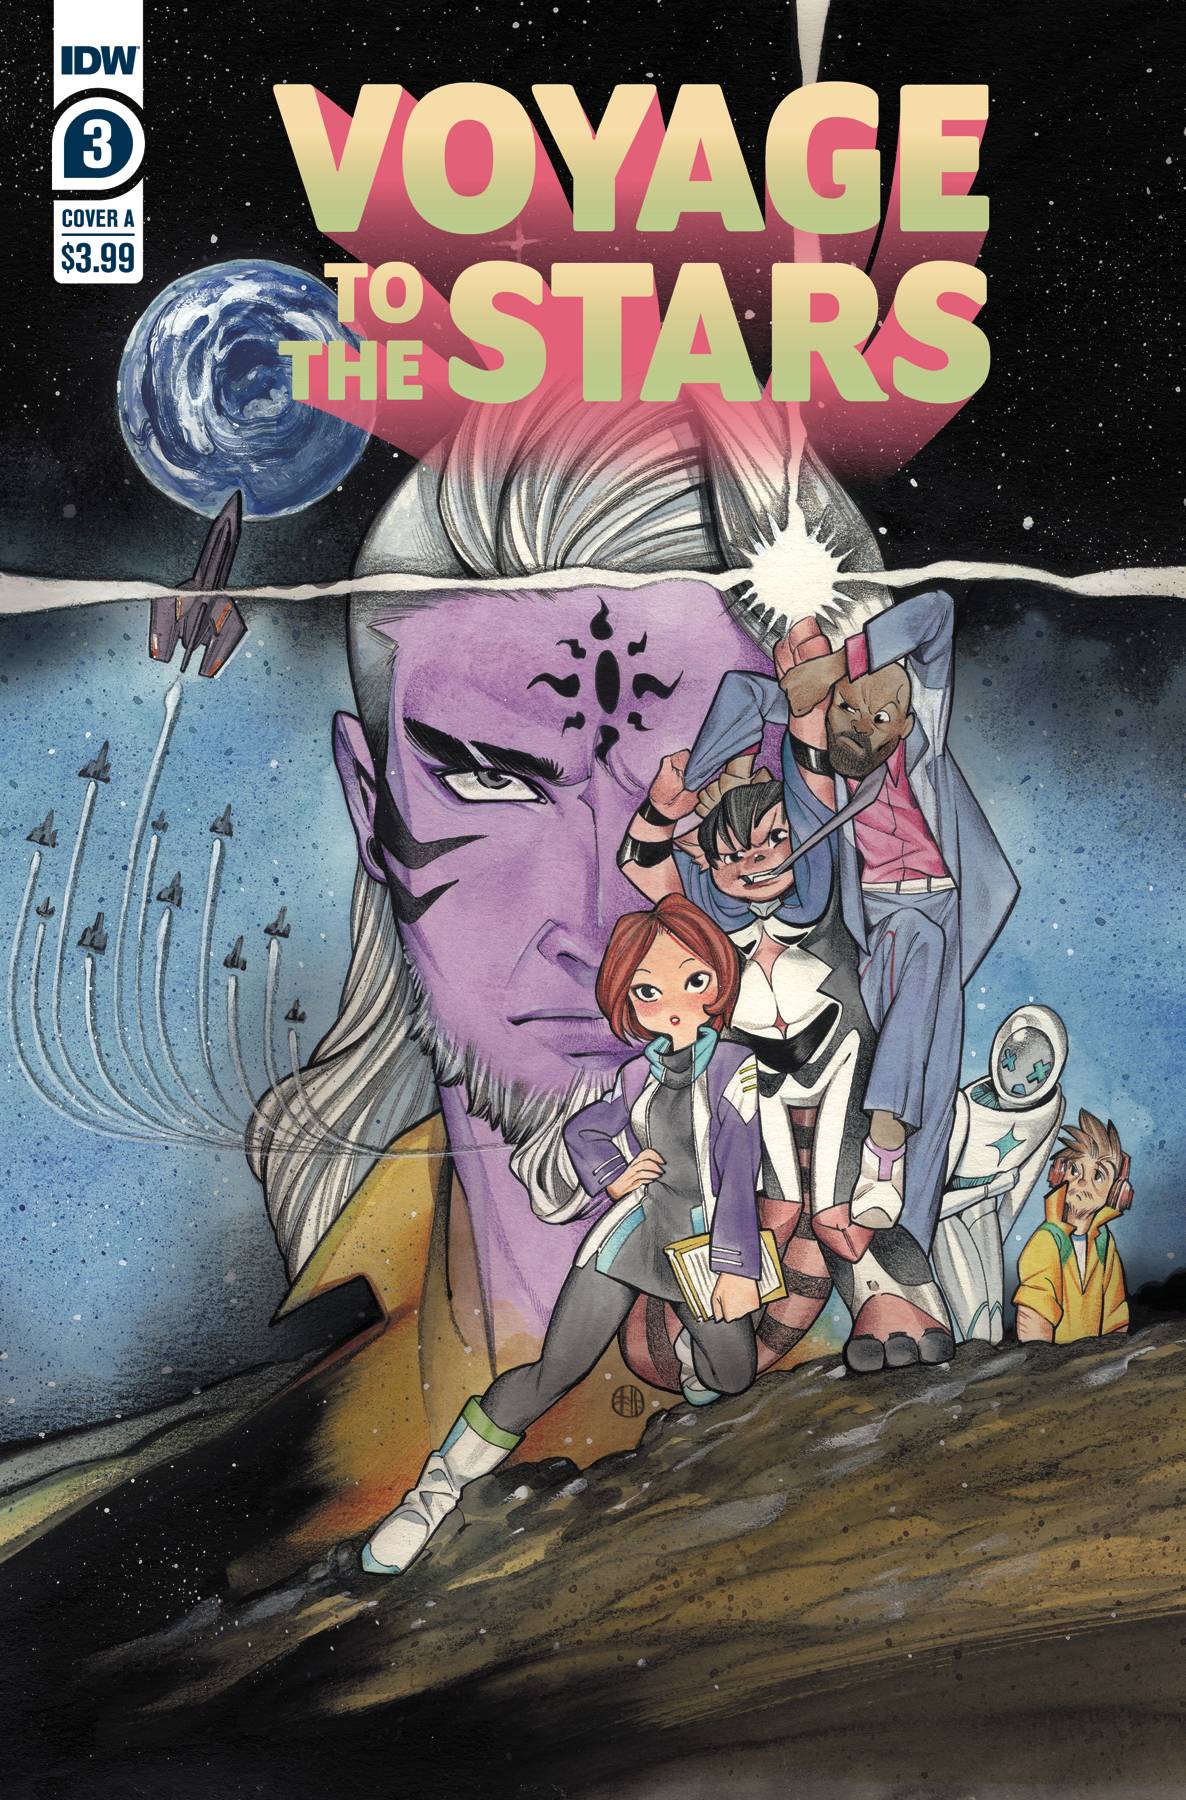 VOYAGE TO THE STARS #4 (OF 4) A PEACH MOMOKO STAR WARS HOMAGE (12/23/2020) IDW